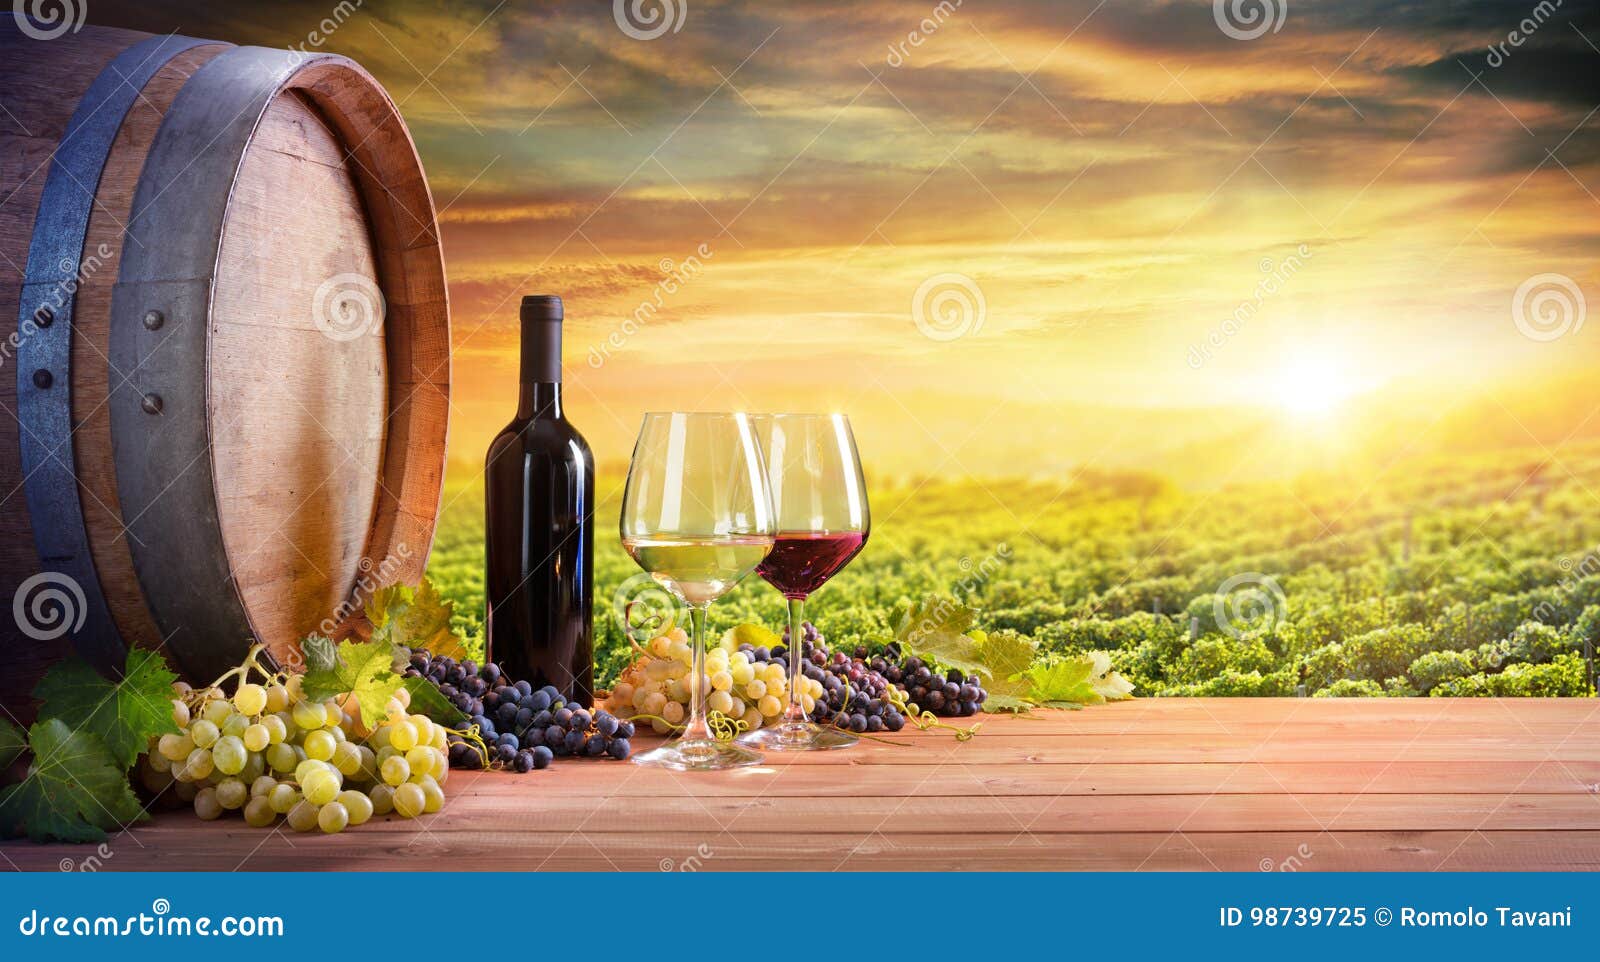 wine glasses and bottle with barrel in vineyard